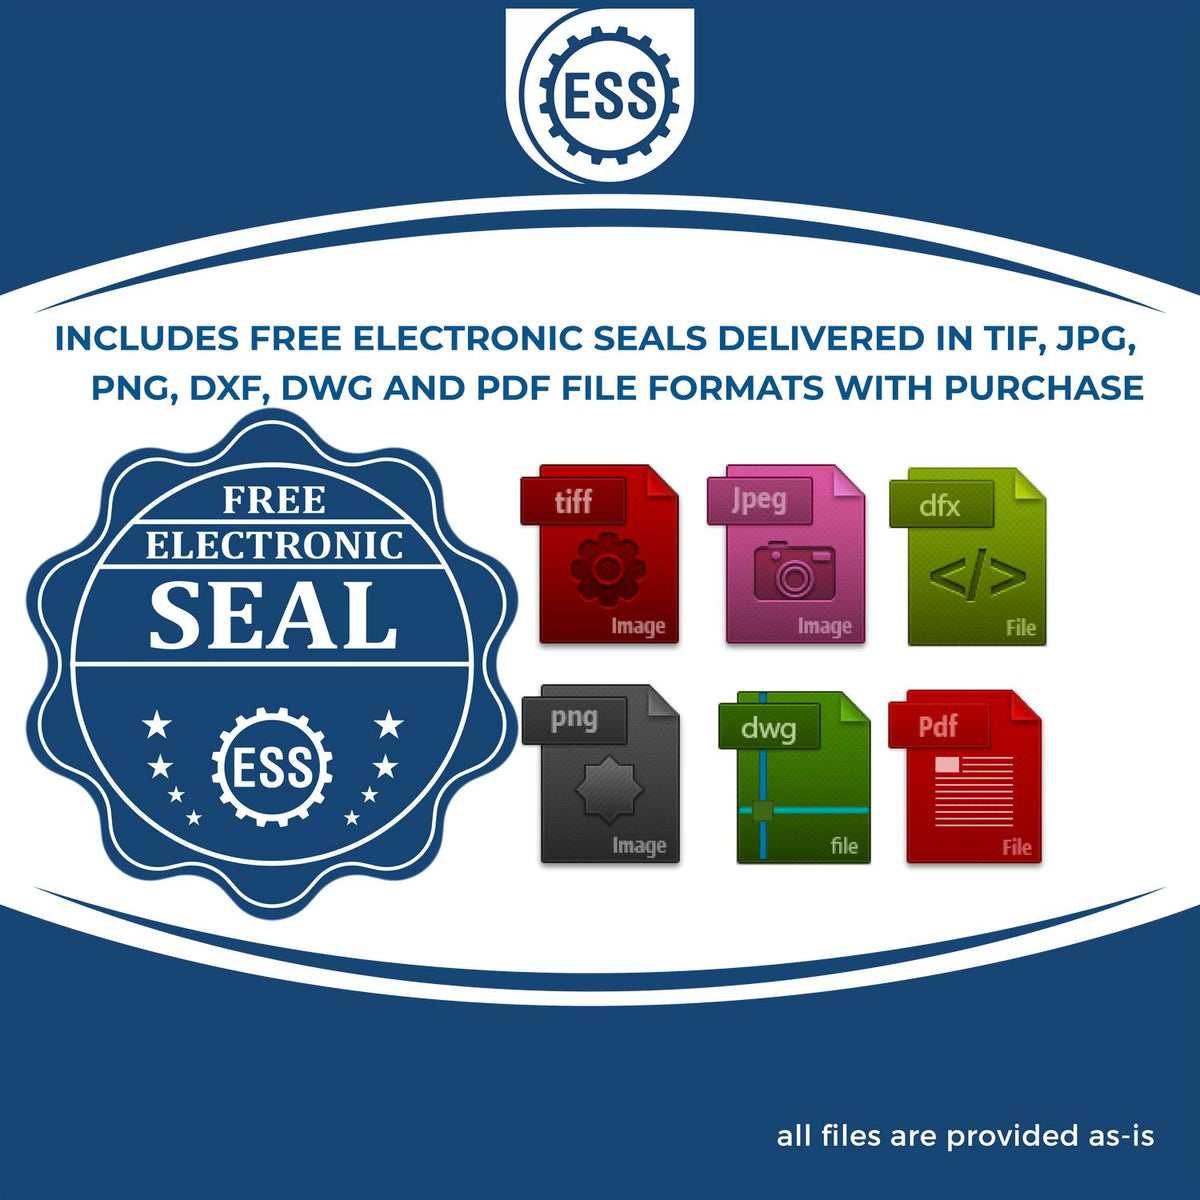 An infographic for the free electronic seal for the Handheld South Carolina Professional Geologist Embosser illustrating the different file type icons such as DXF, DWG, TIF, JPG and PNG.